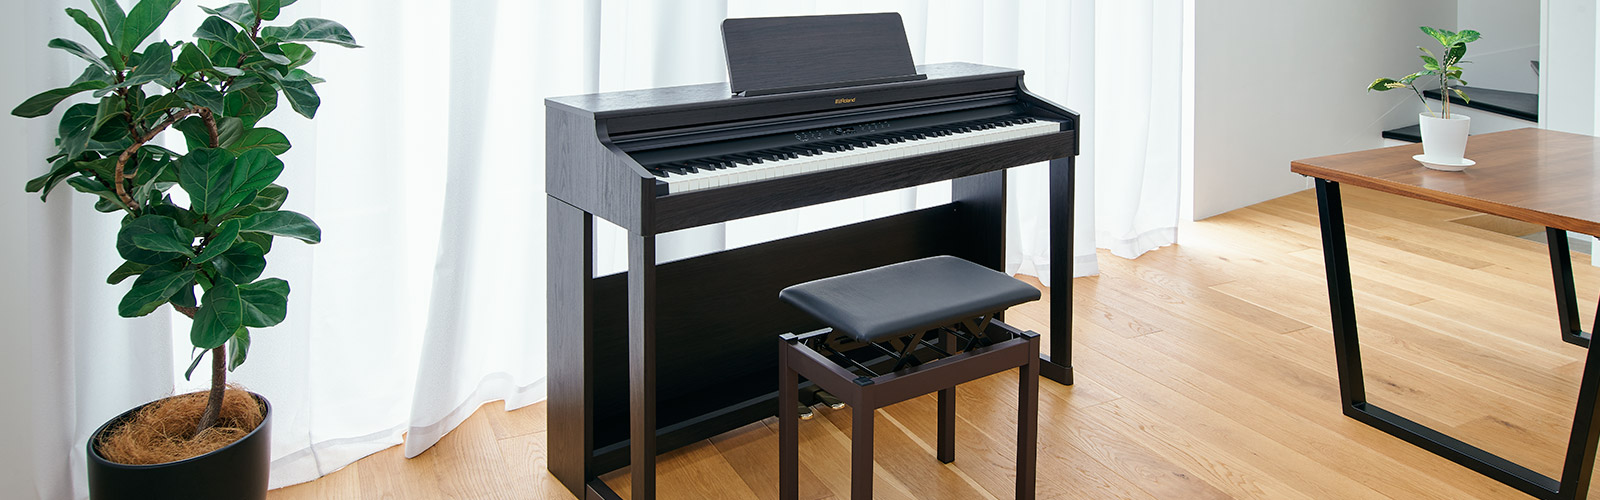 digital piano for home use.